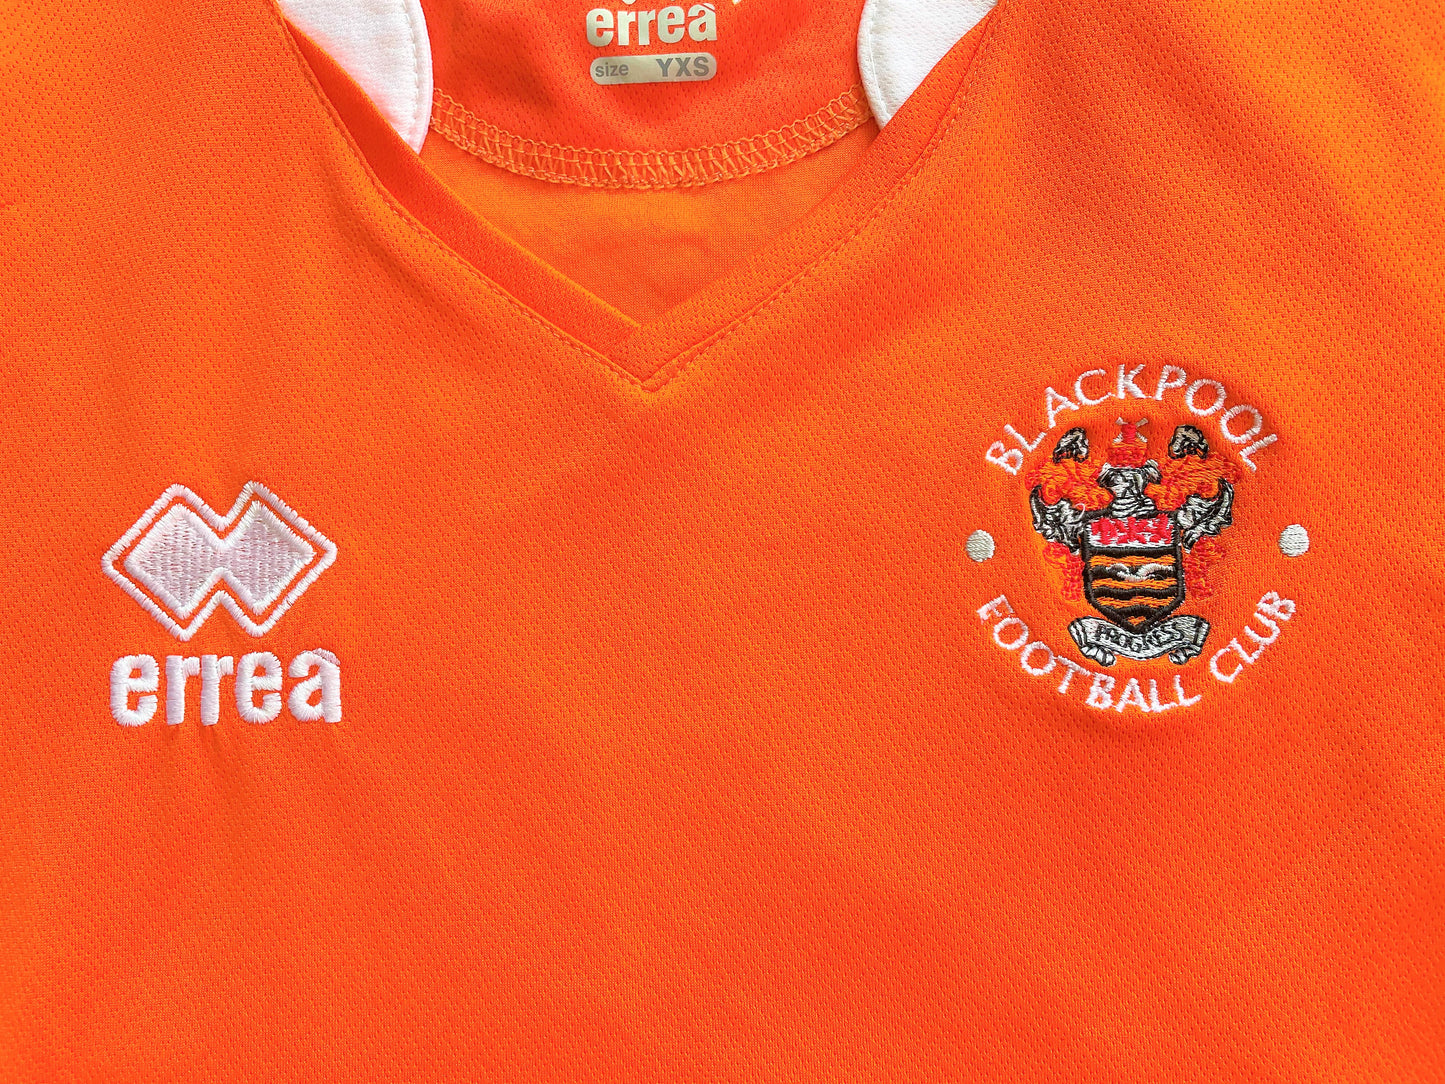 Blackpool Home Shirt 2016 (very good) Youth XSmall. Height 15.5 inches